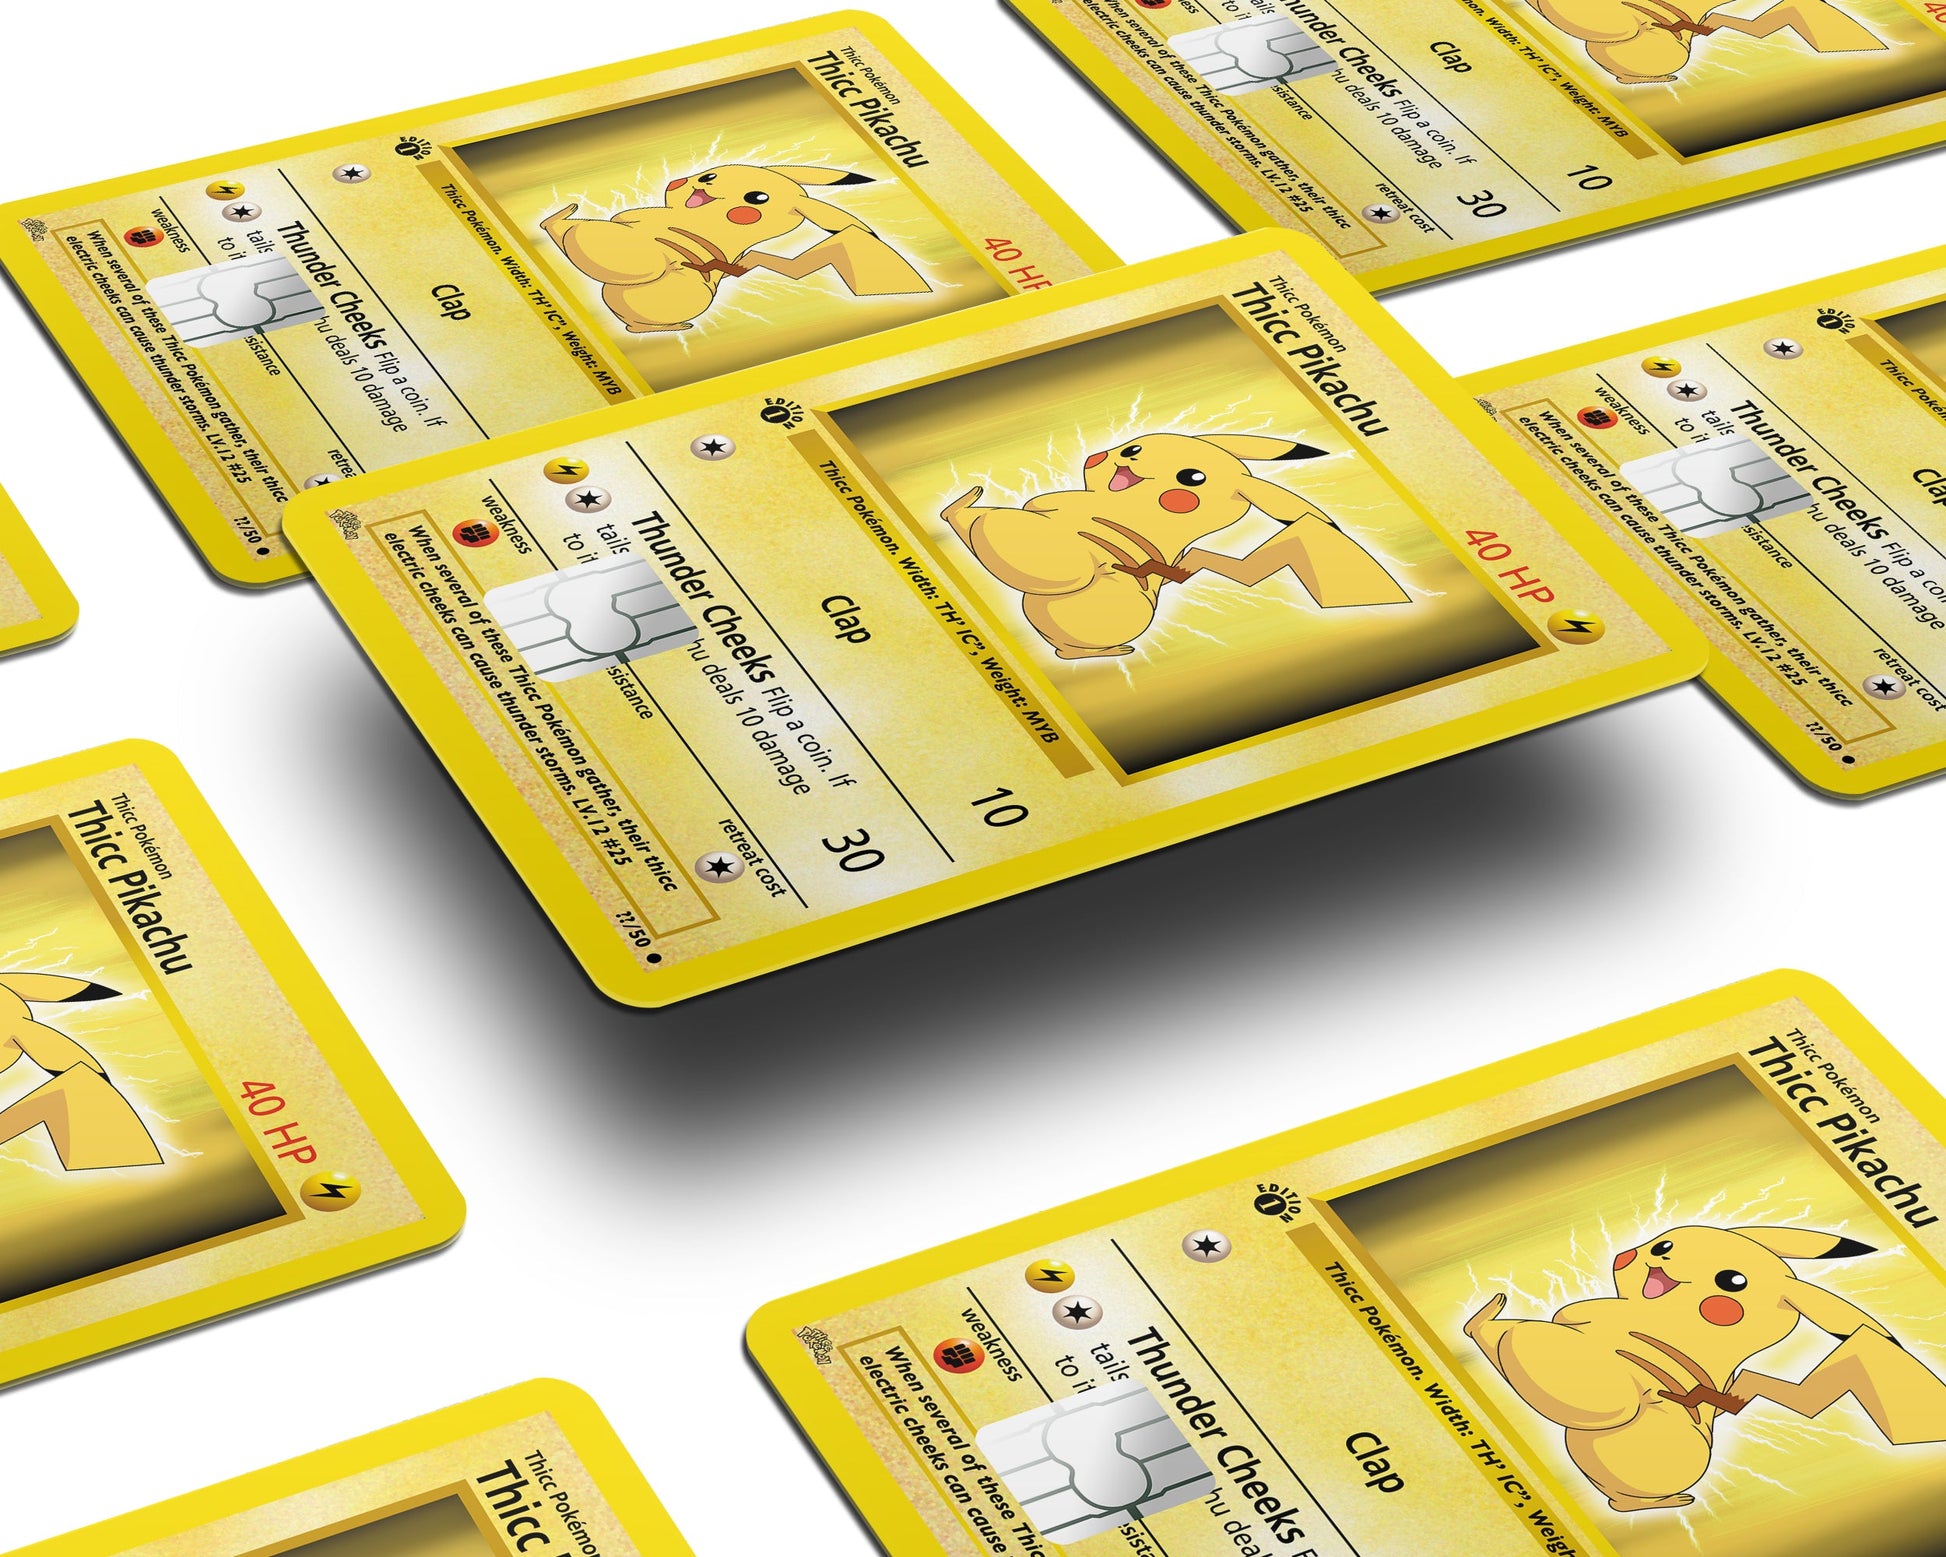 Anime Town Creations Credit Card Thicc Pikachu Pokemon Card Half Skins - Anime Pokemon Credit Card Skin